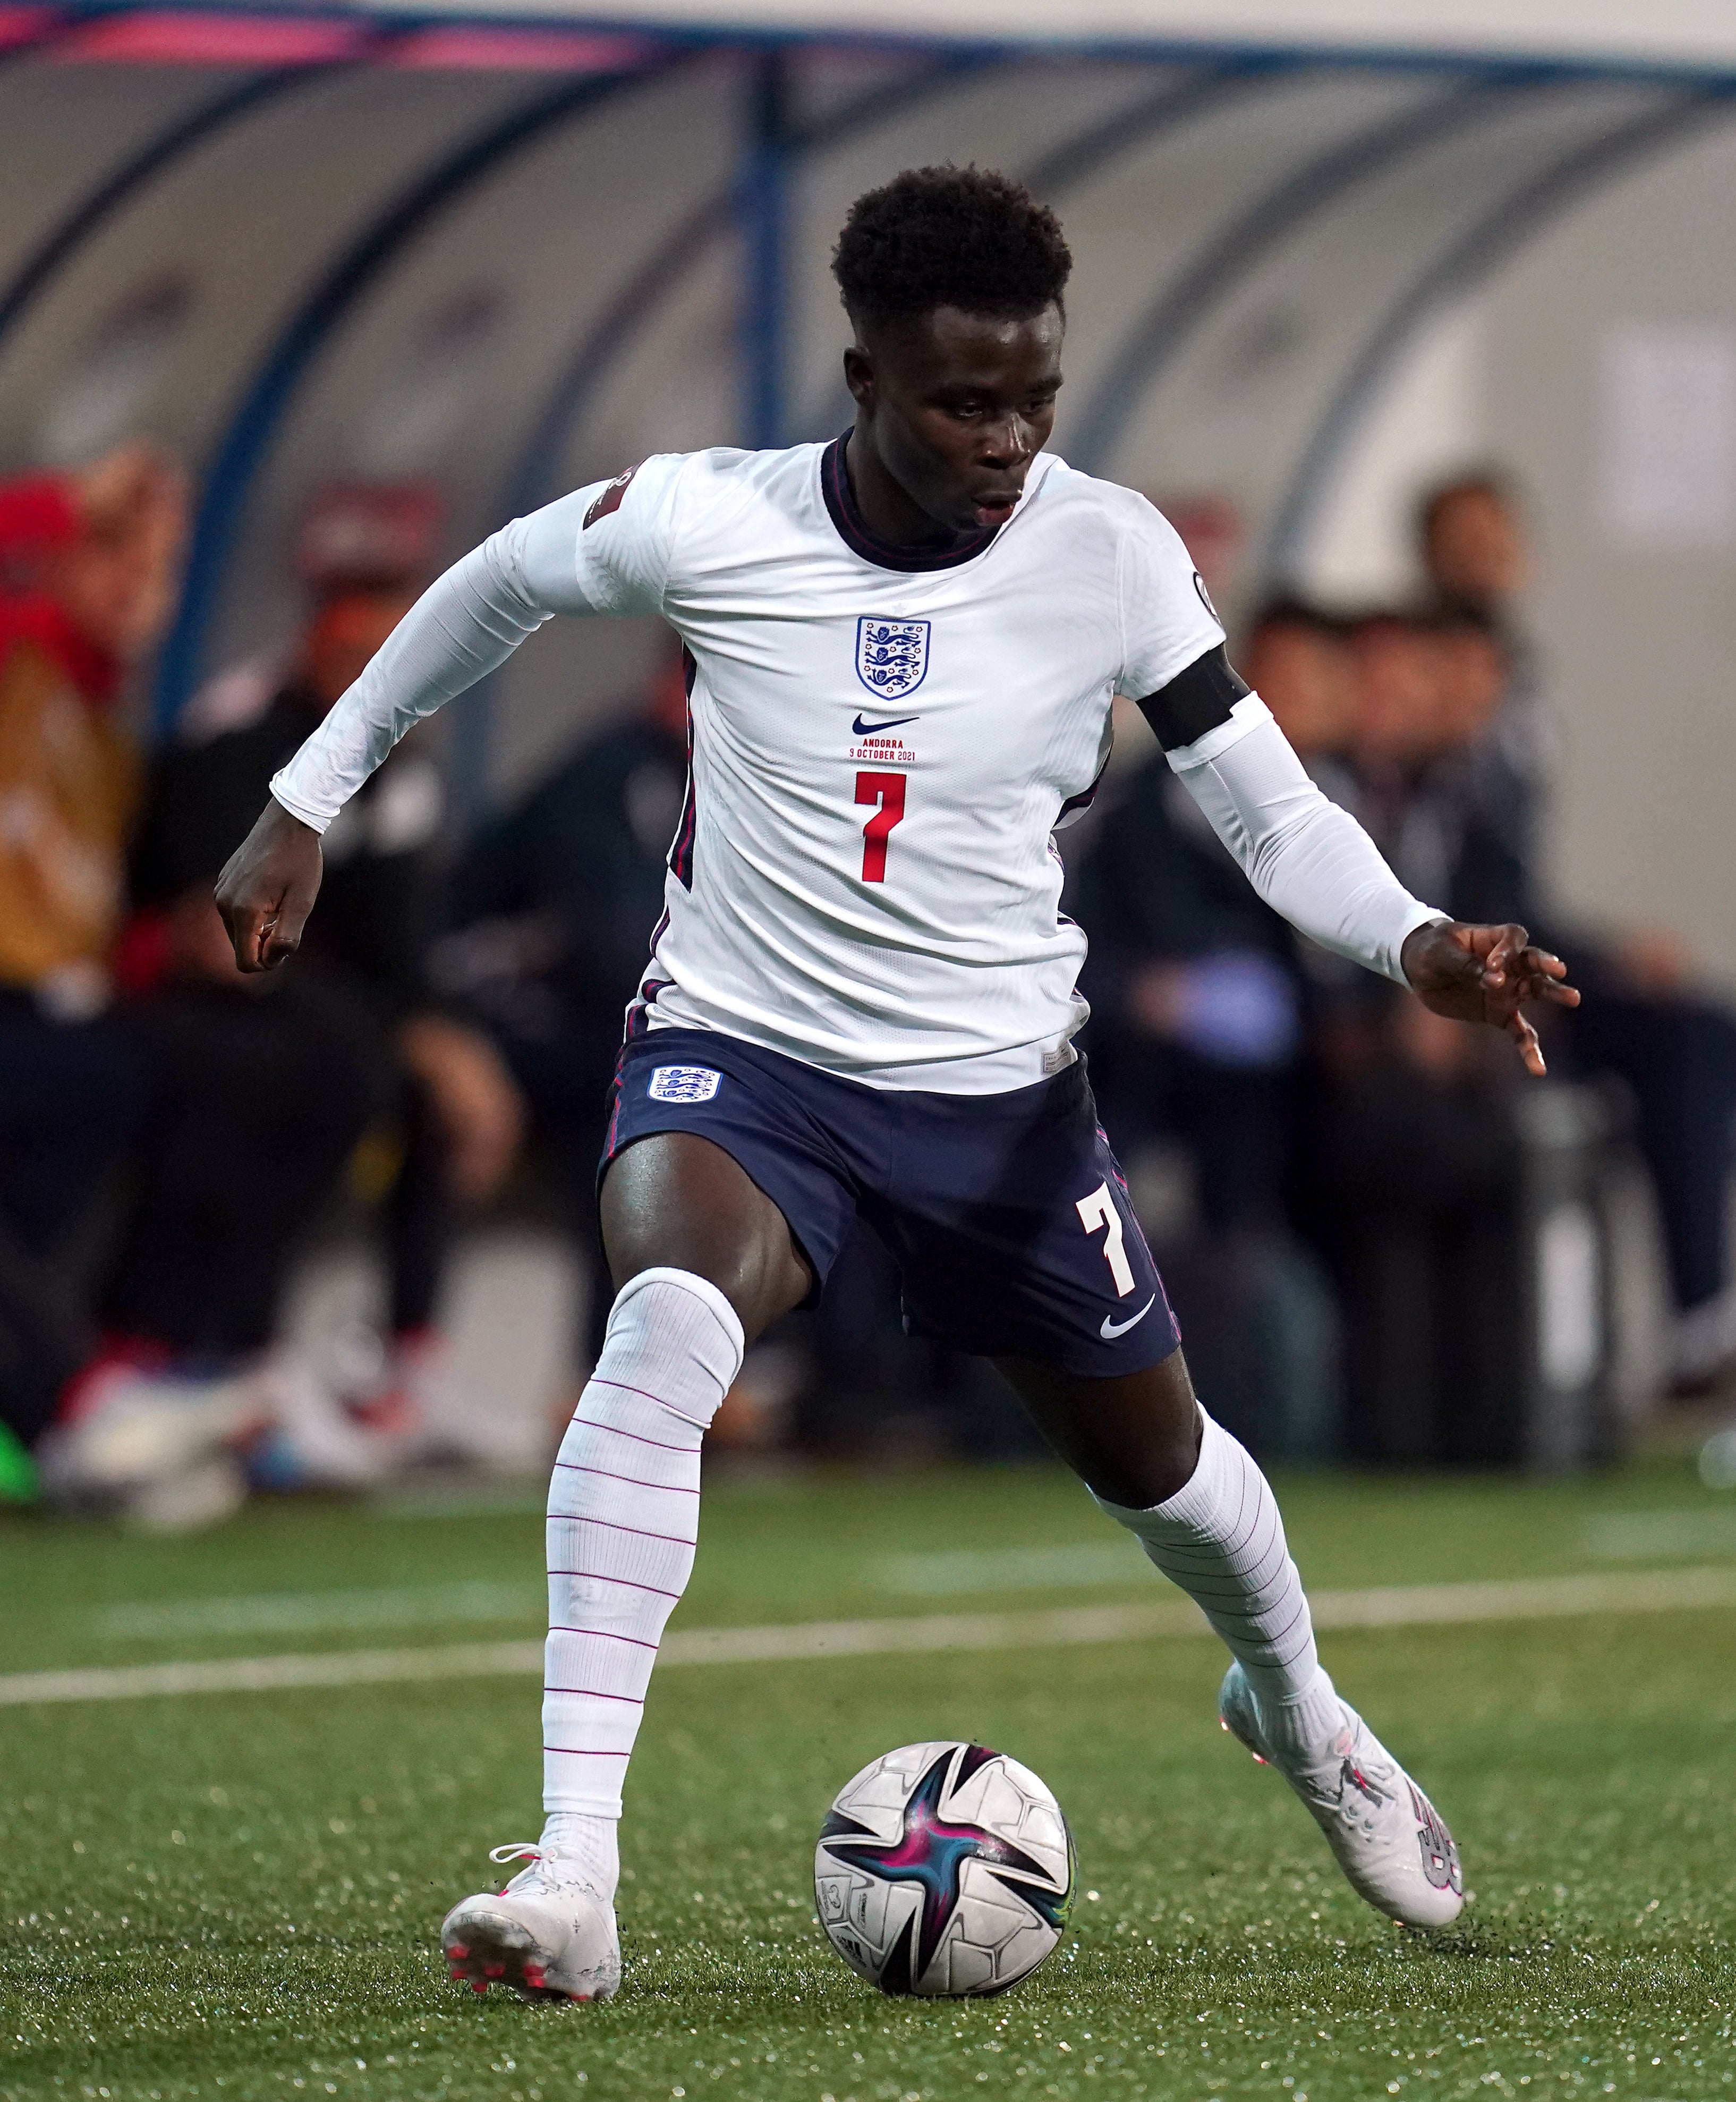 Bush asks me to compare the abusive words my character used with the abuse directed at England’s Bukayo Saka, pictured, and his team-mates Marcus Rashford and Jadon Sancho (Nick Potts/PA)